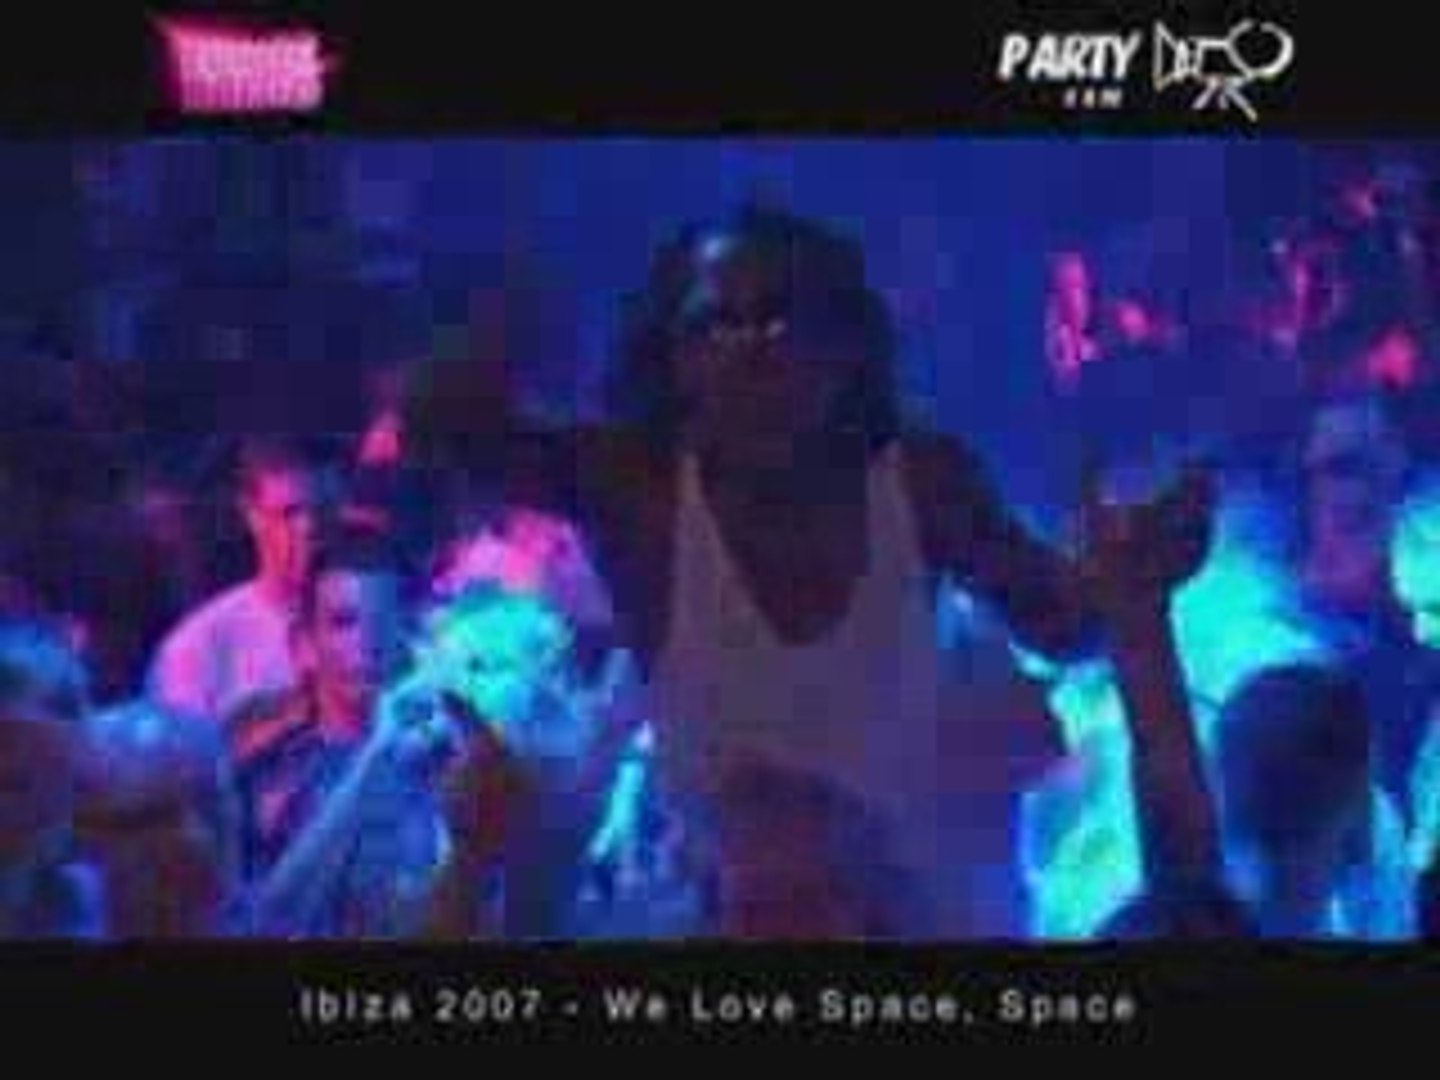 Ibiza 2007 We Love Space ( Space )